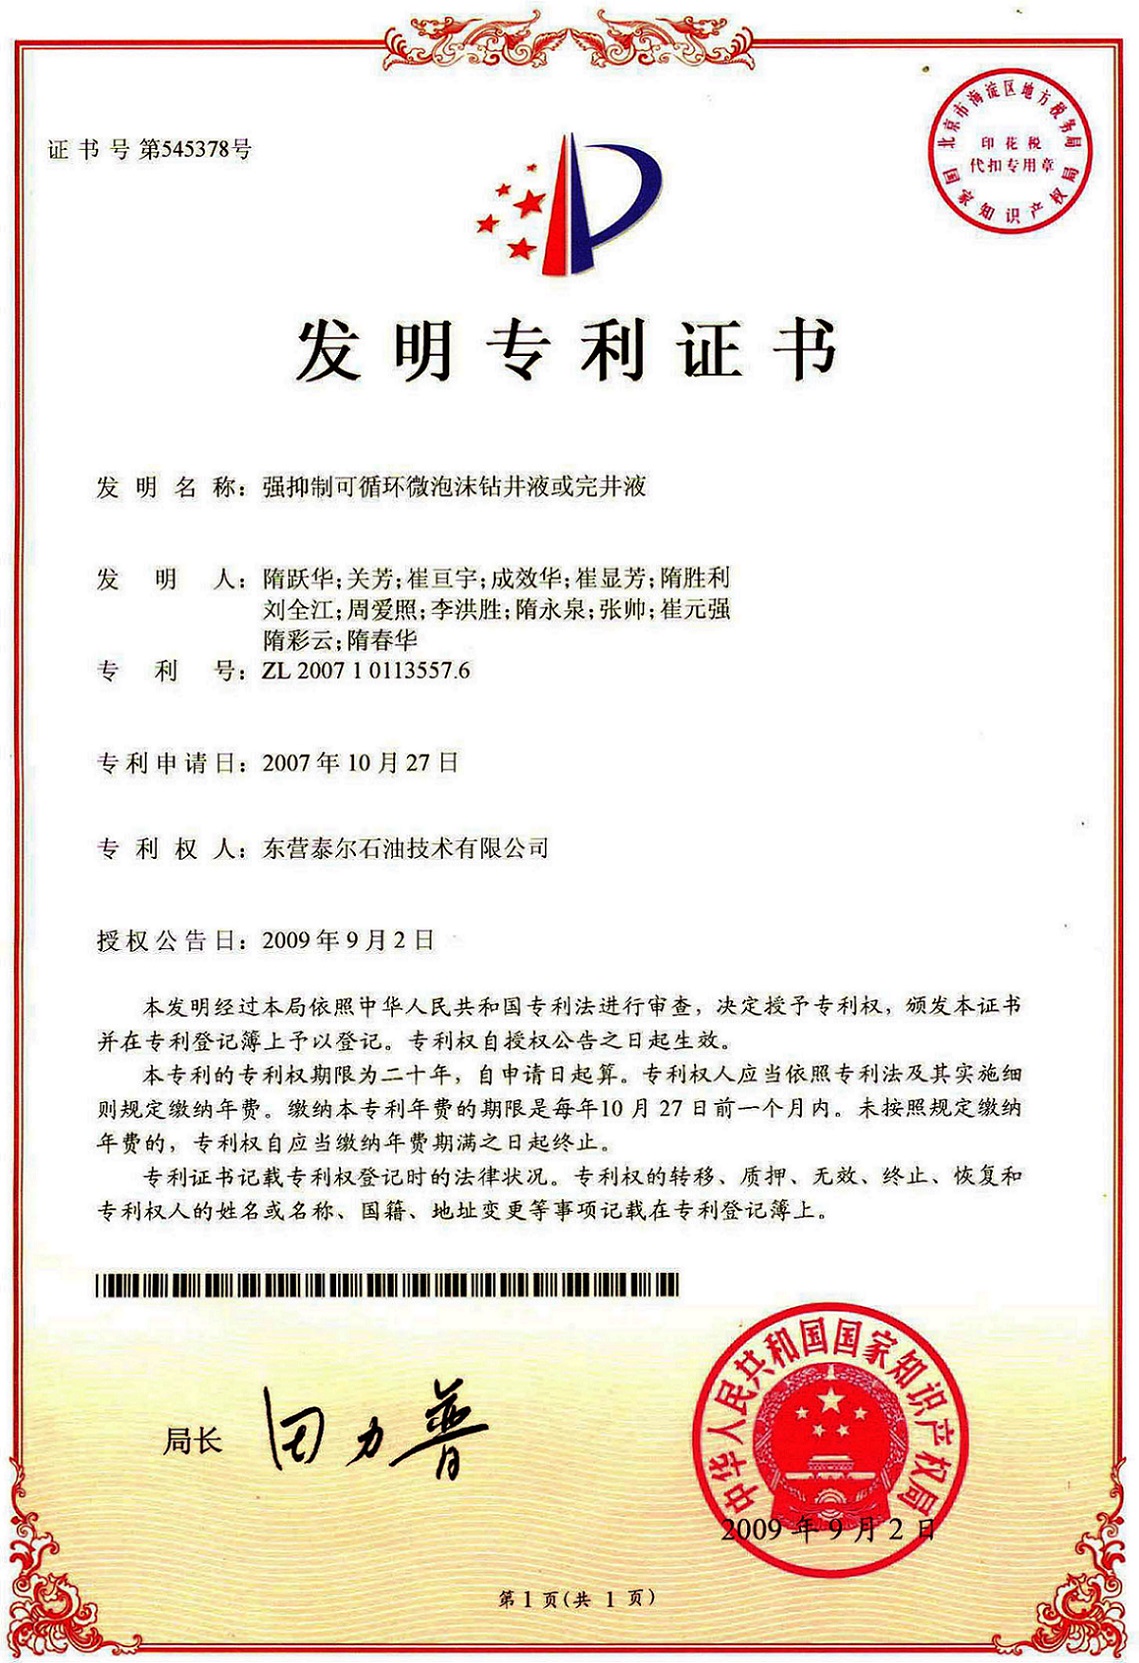 The company patent won the first prize of Dongying